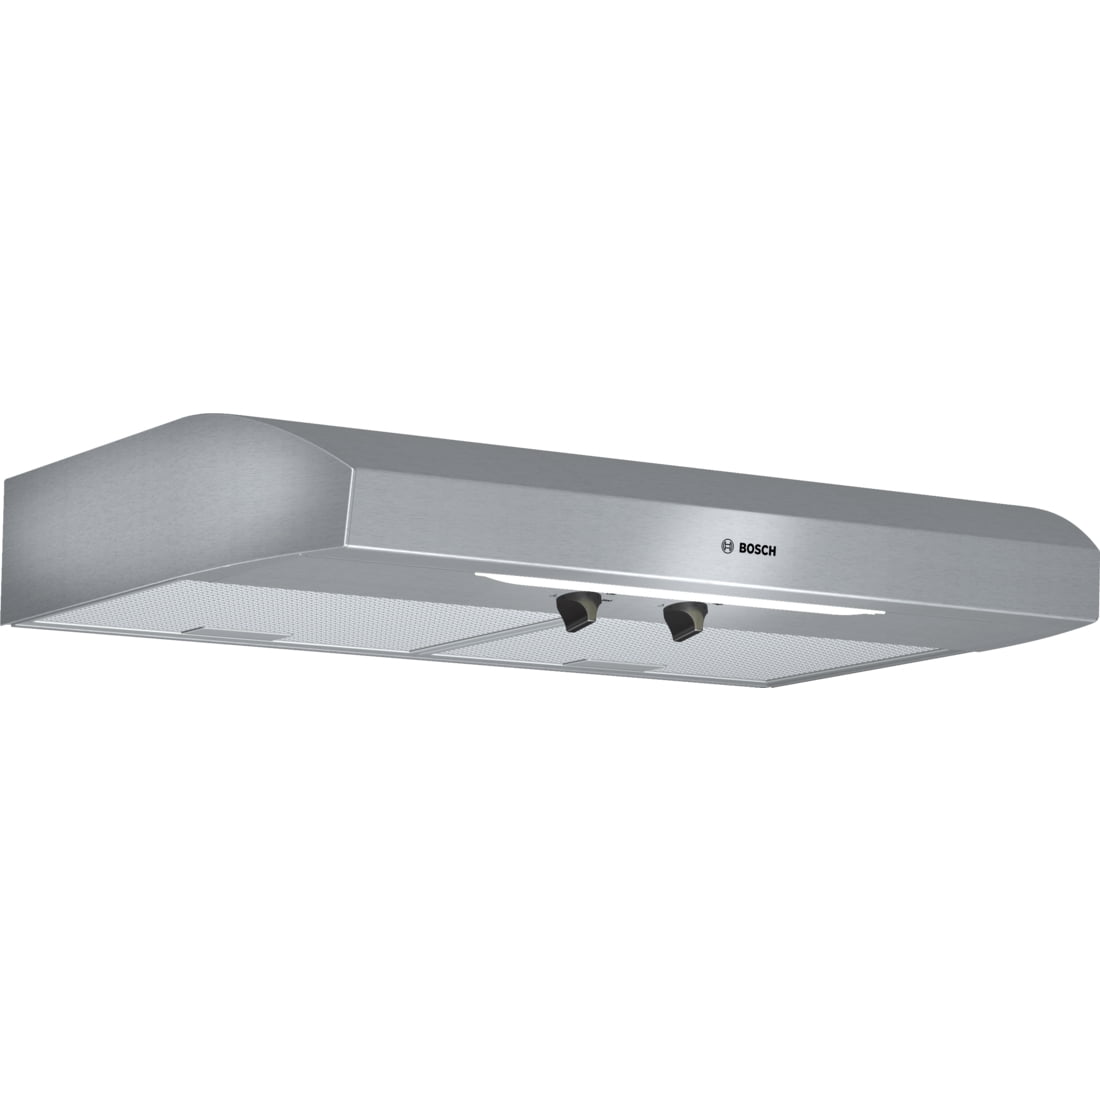 Duh 300 Series Duh30152uc 30 Under Cabinet Wall Hood With 280 Cfm